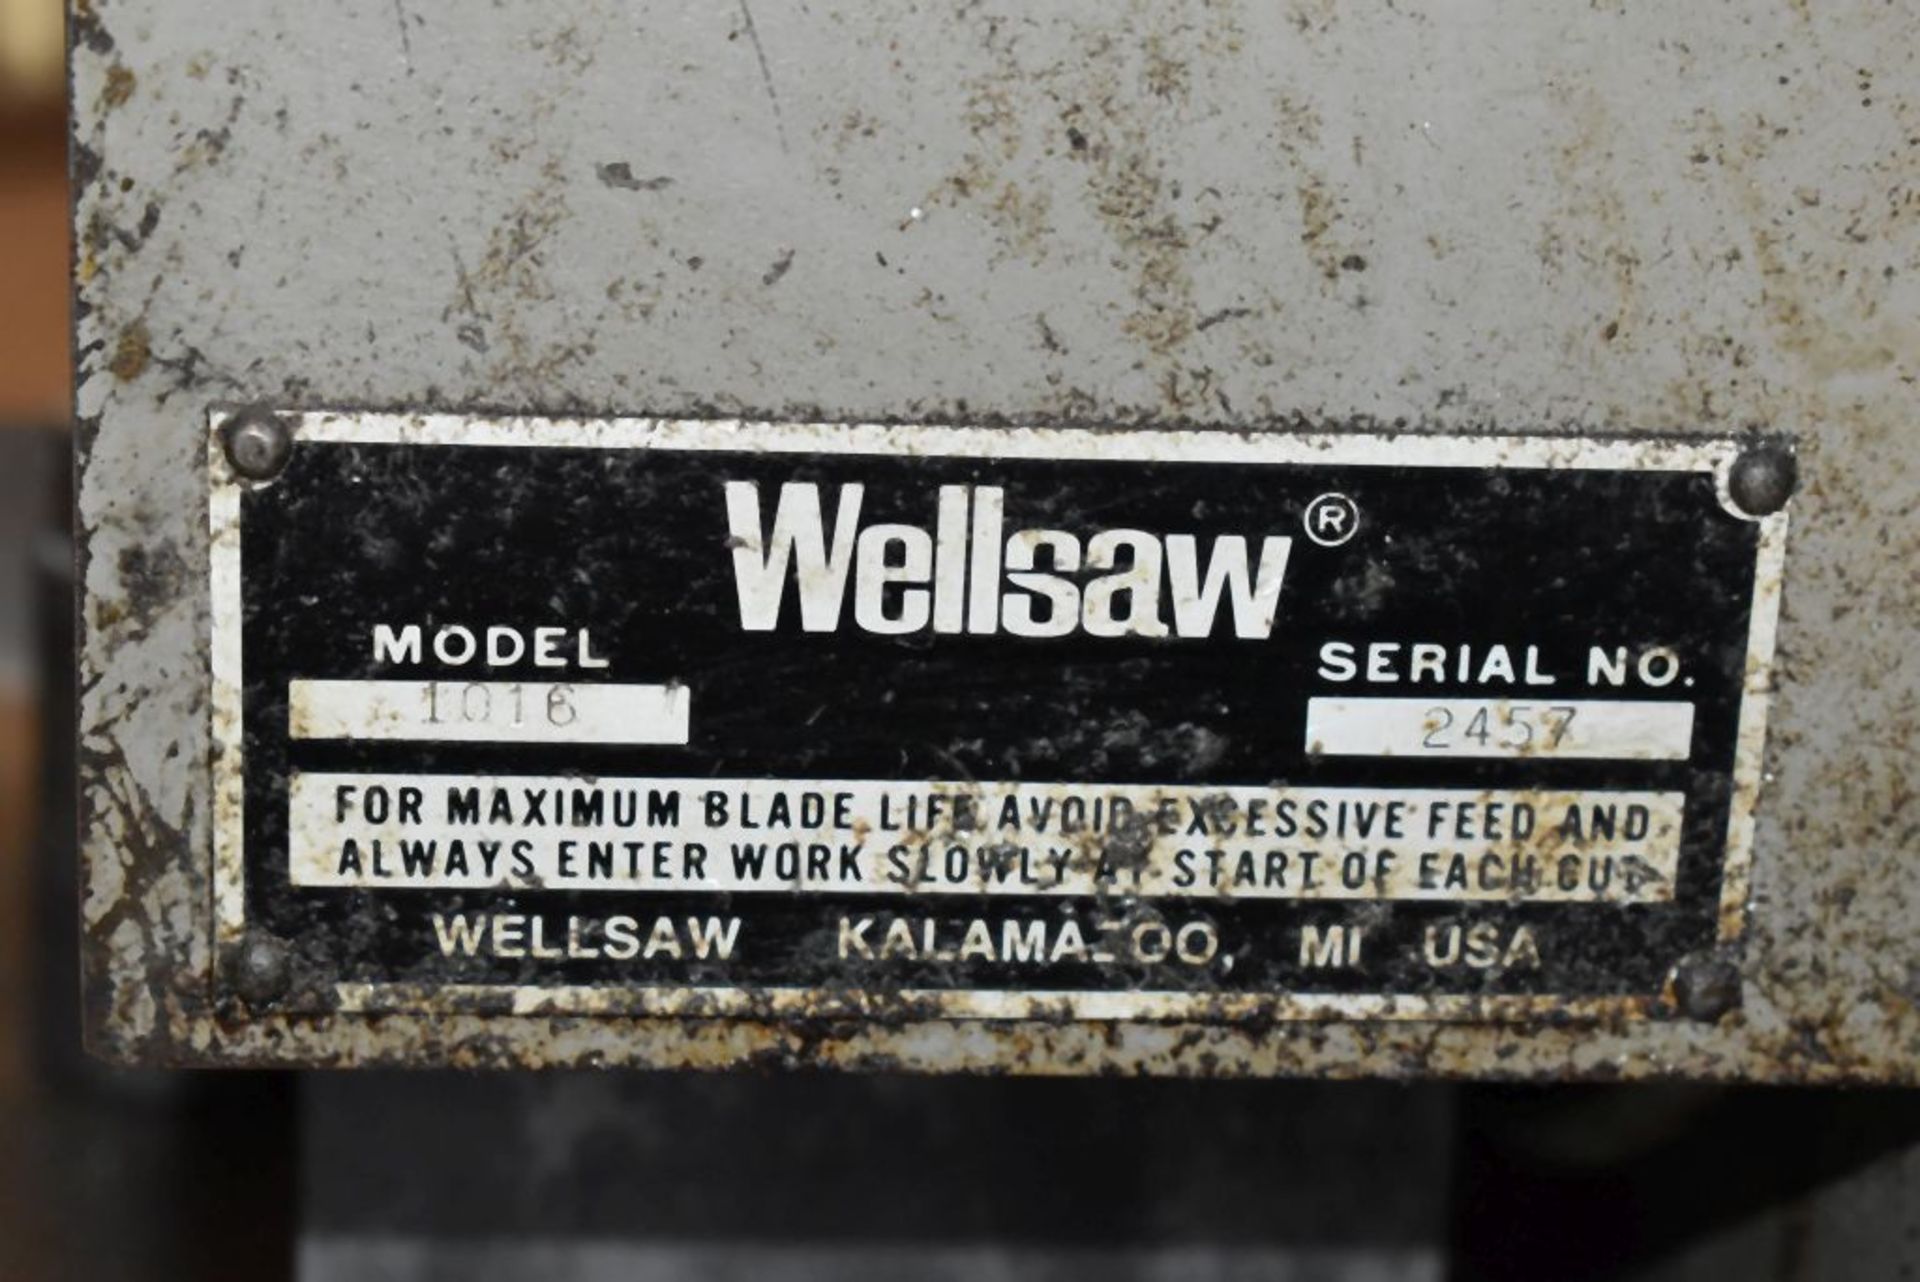 WELLSAW HORIZONTAL BAND SAW, MODEL 1016, S/N: 2457, 2 H.P. MANUAL STOCK CLAMP, STOCK STOP, - Image 3 of 3